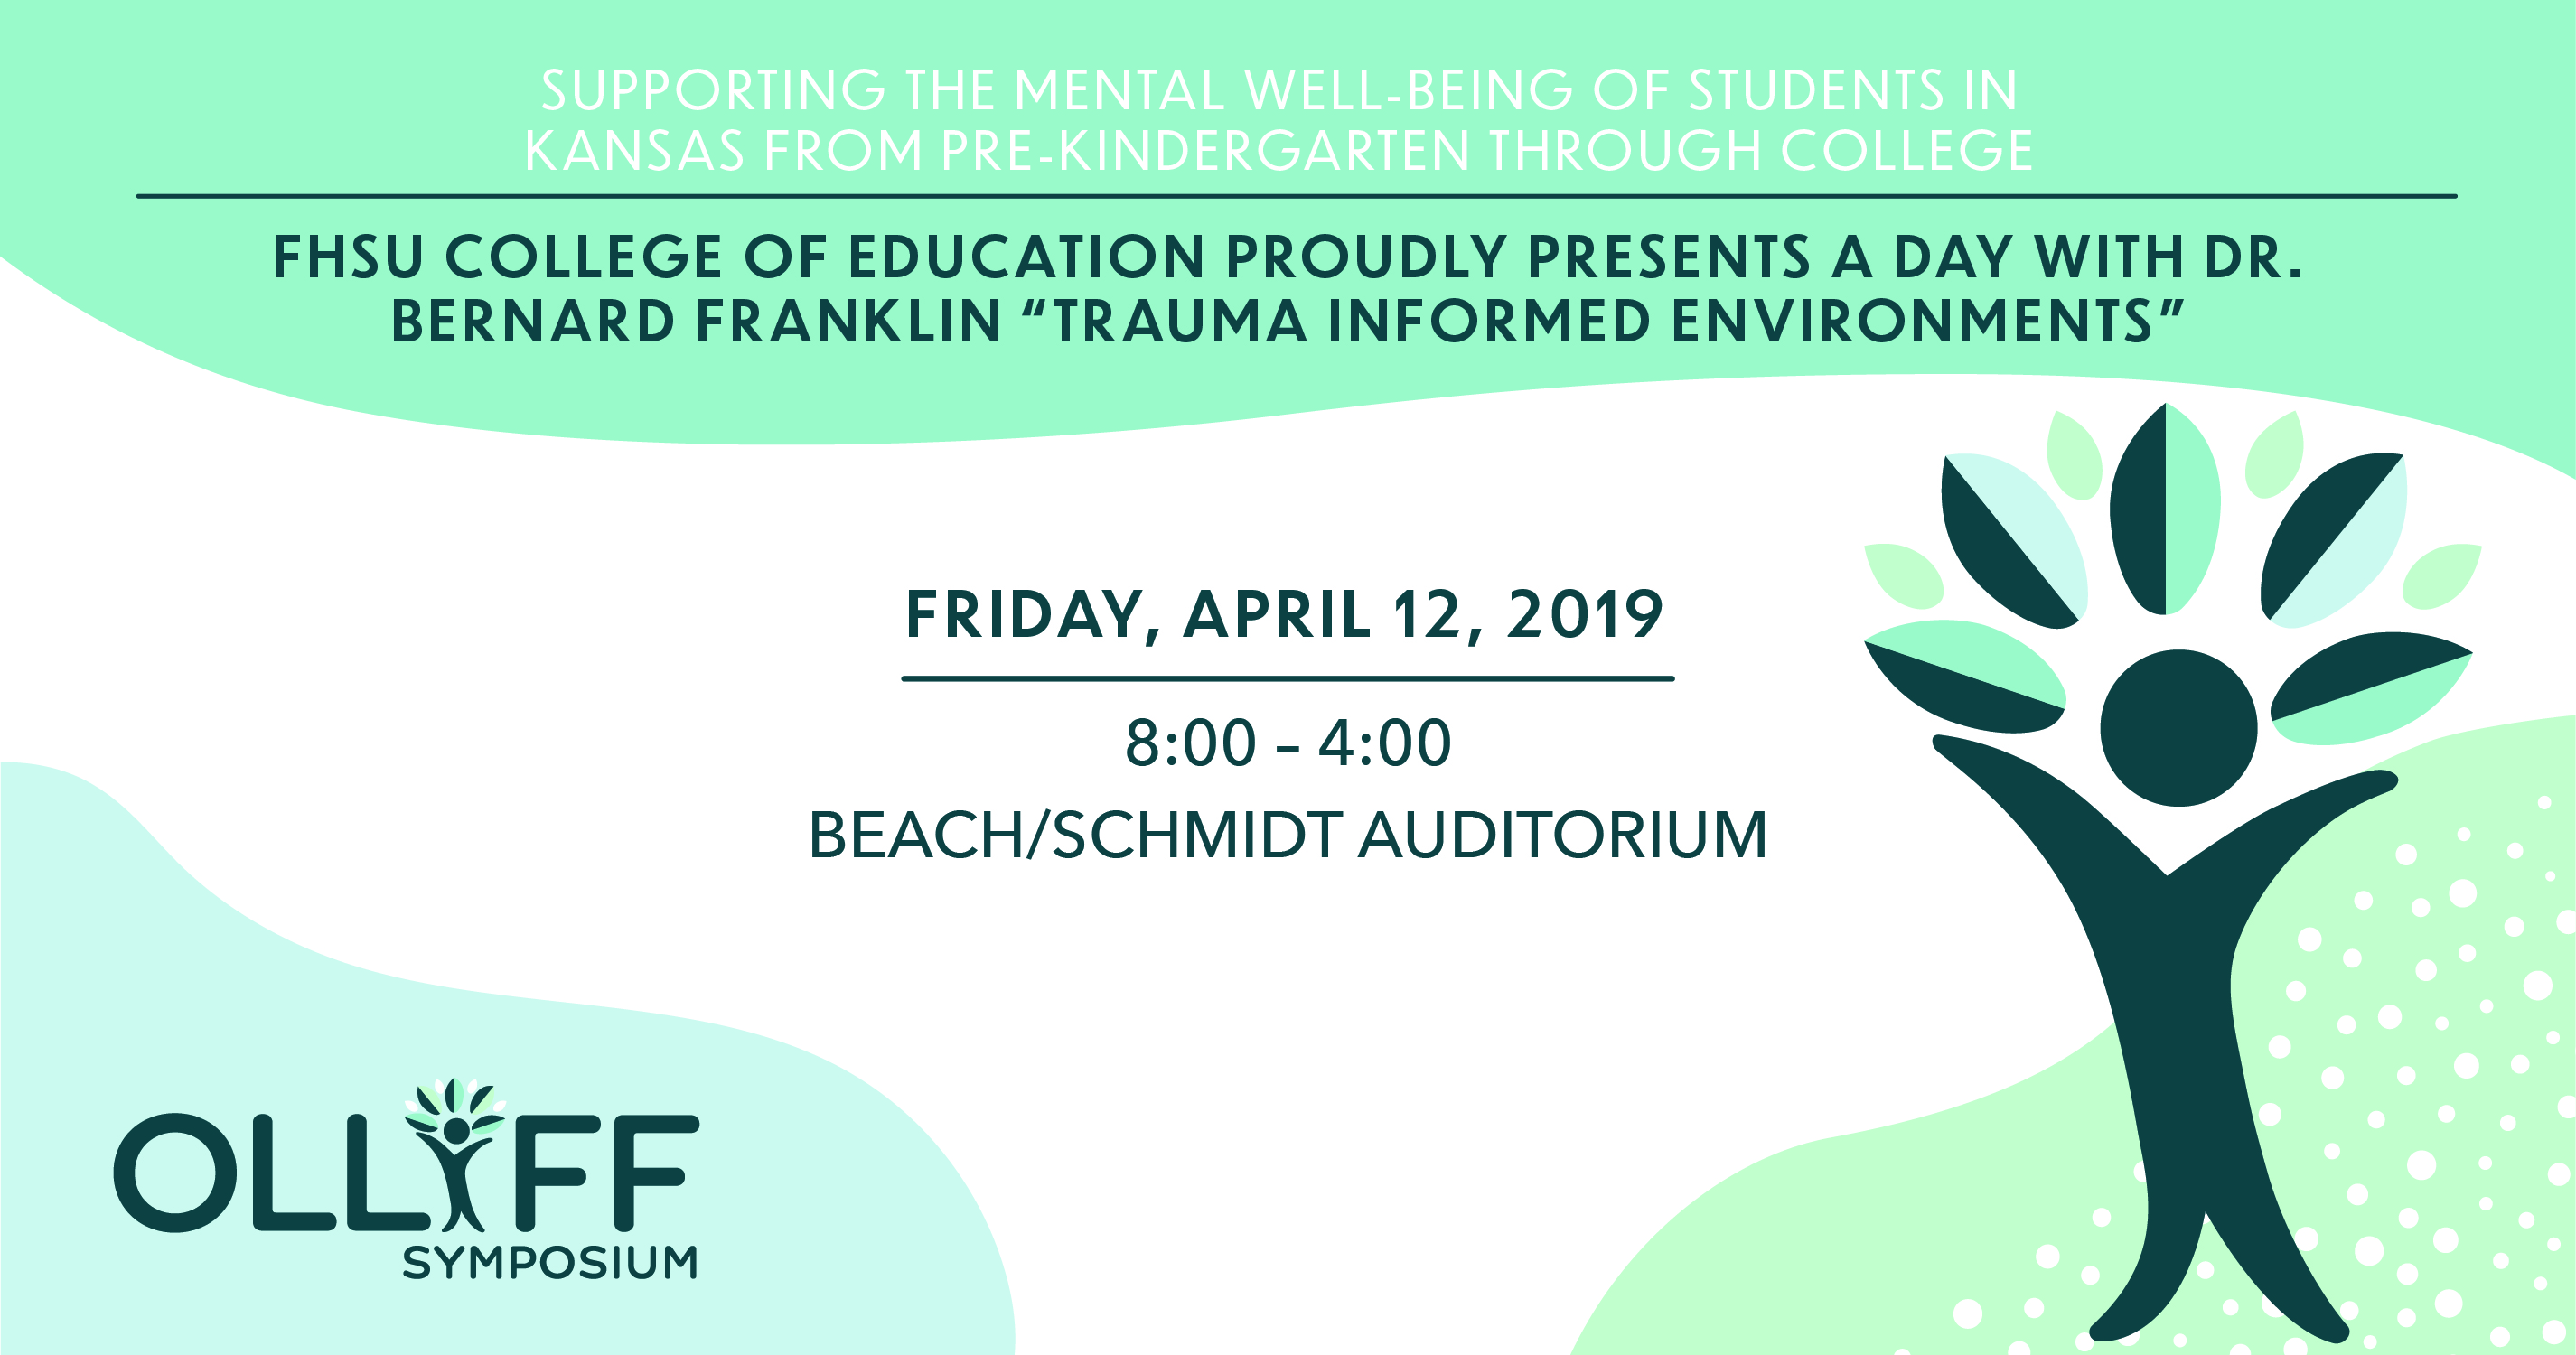 Olliff Family Symposium to address fostering good mental health among students of all ages